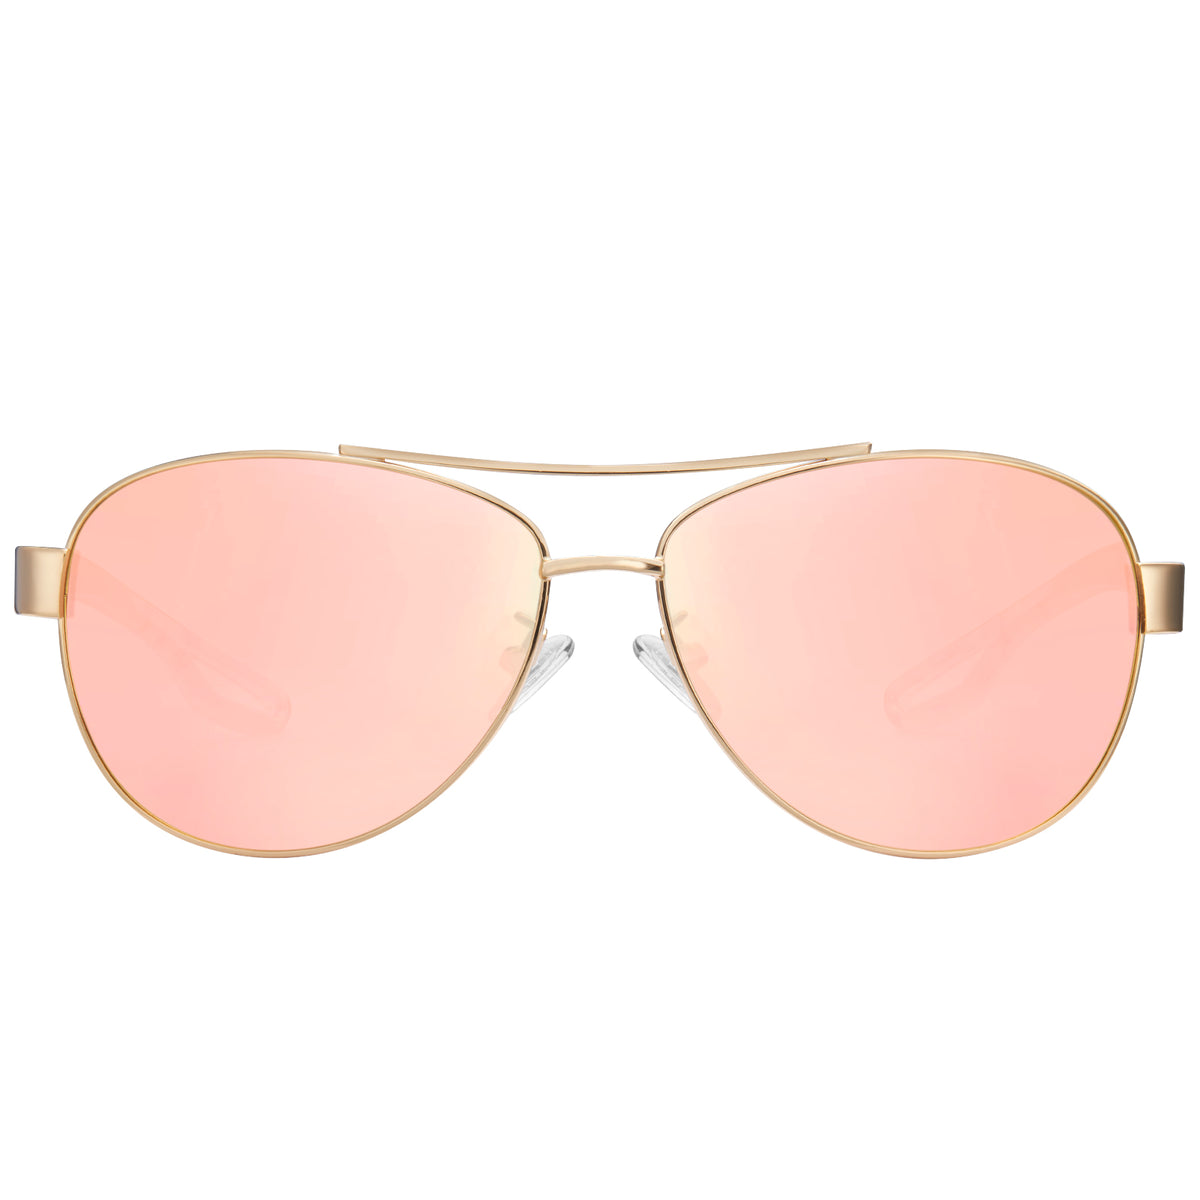 Tiamo - Bright Gold Frame with Pink Lenses